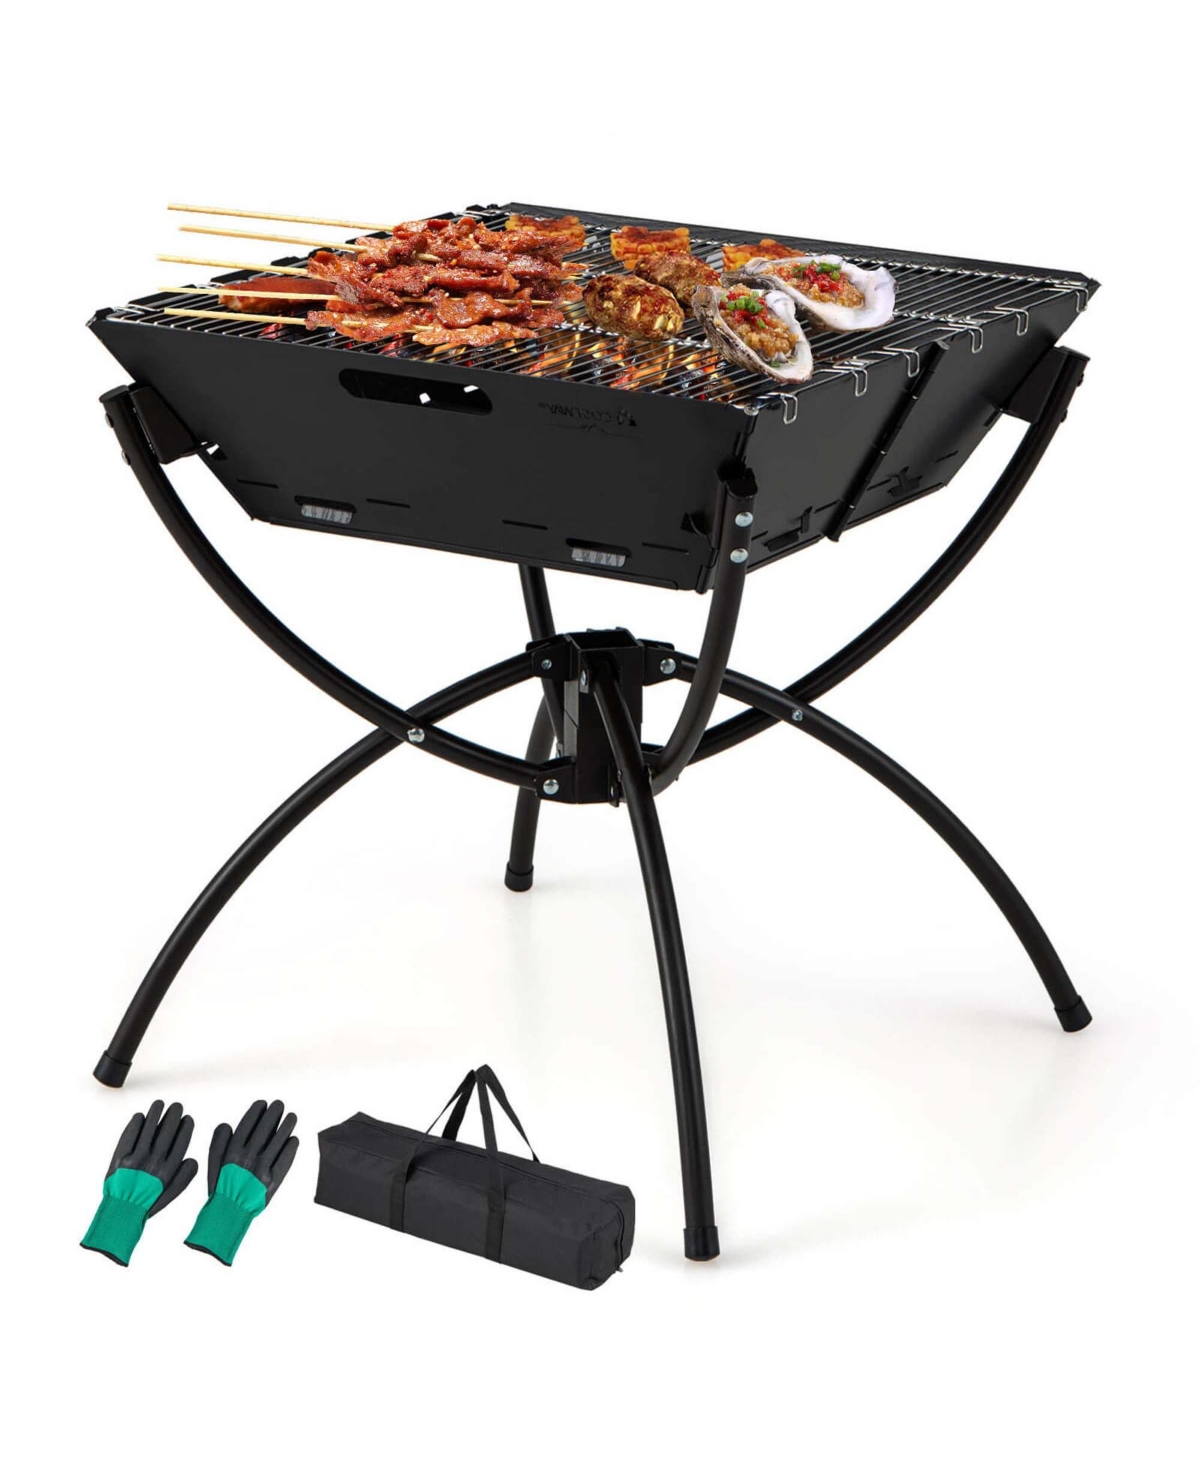 3-in-1 Portable Charcoal Grill Folding Camping Fire Pit with Carrying Bag & Gloves - Silver